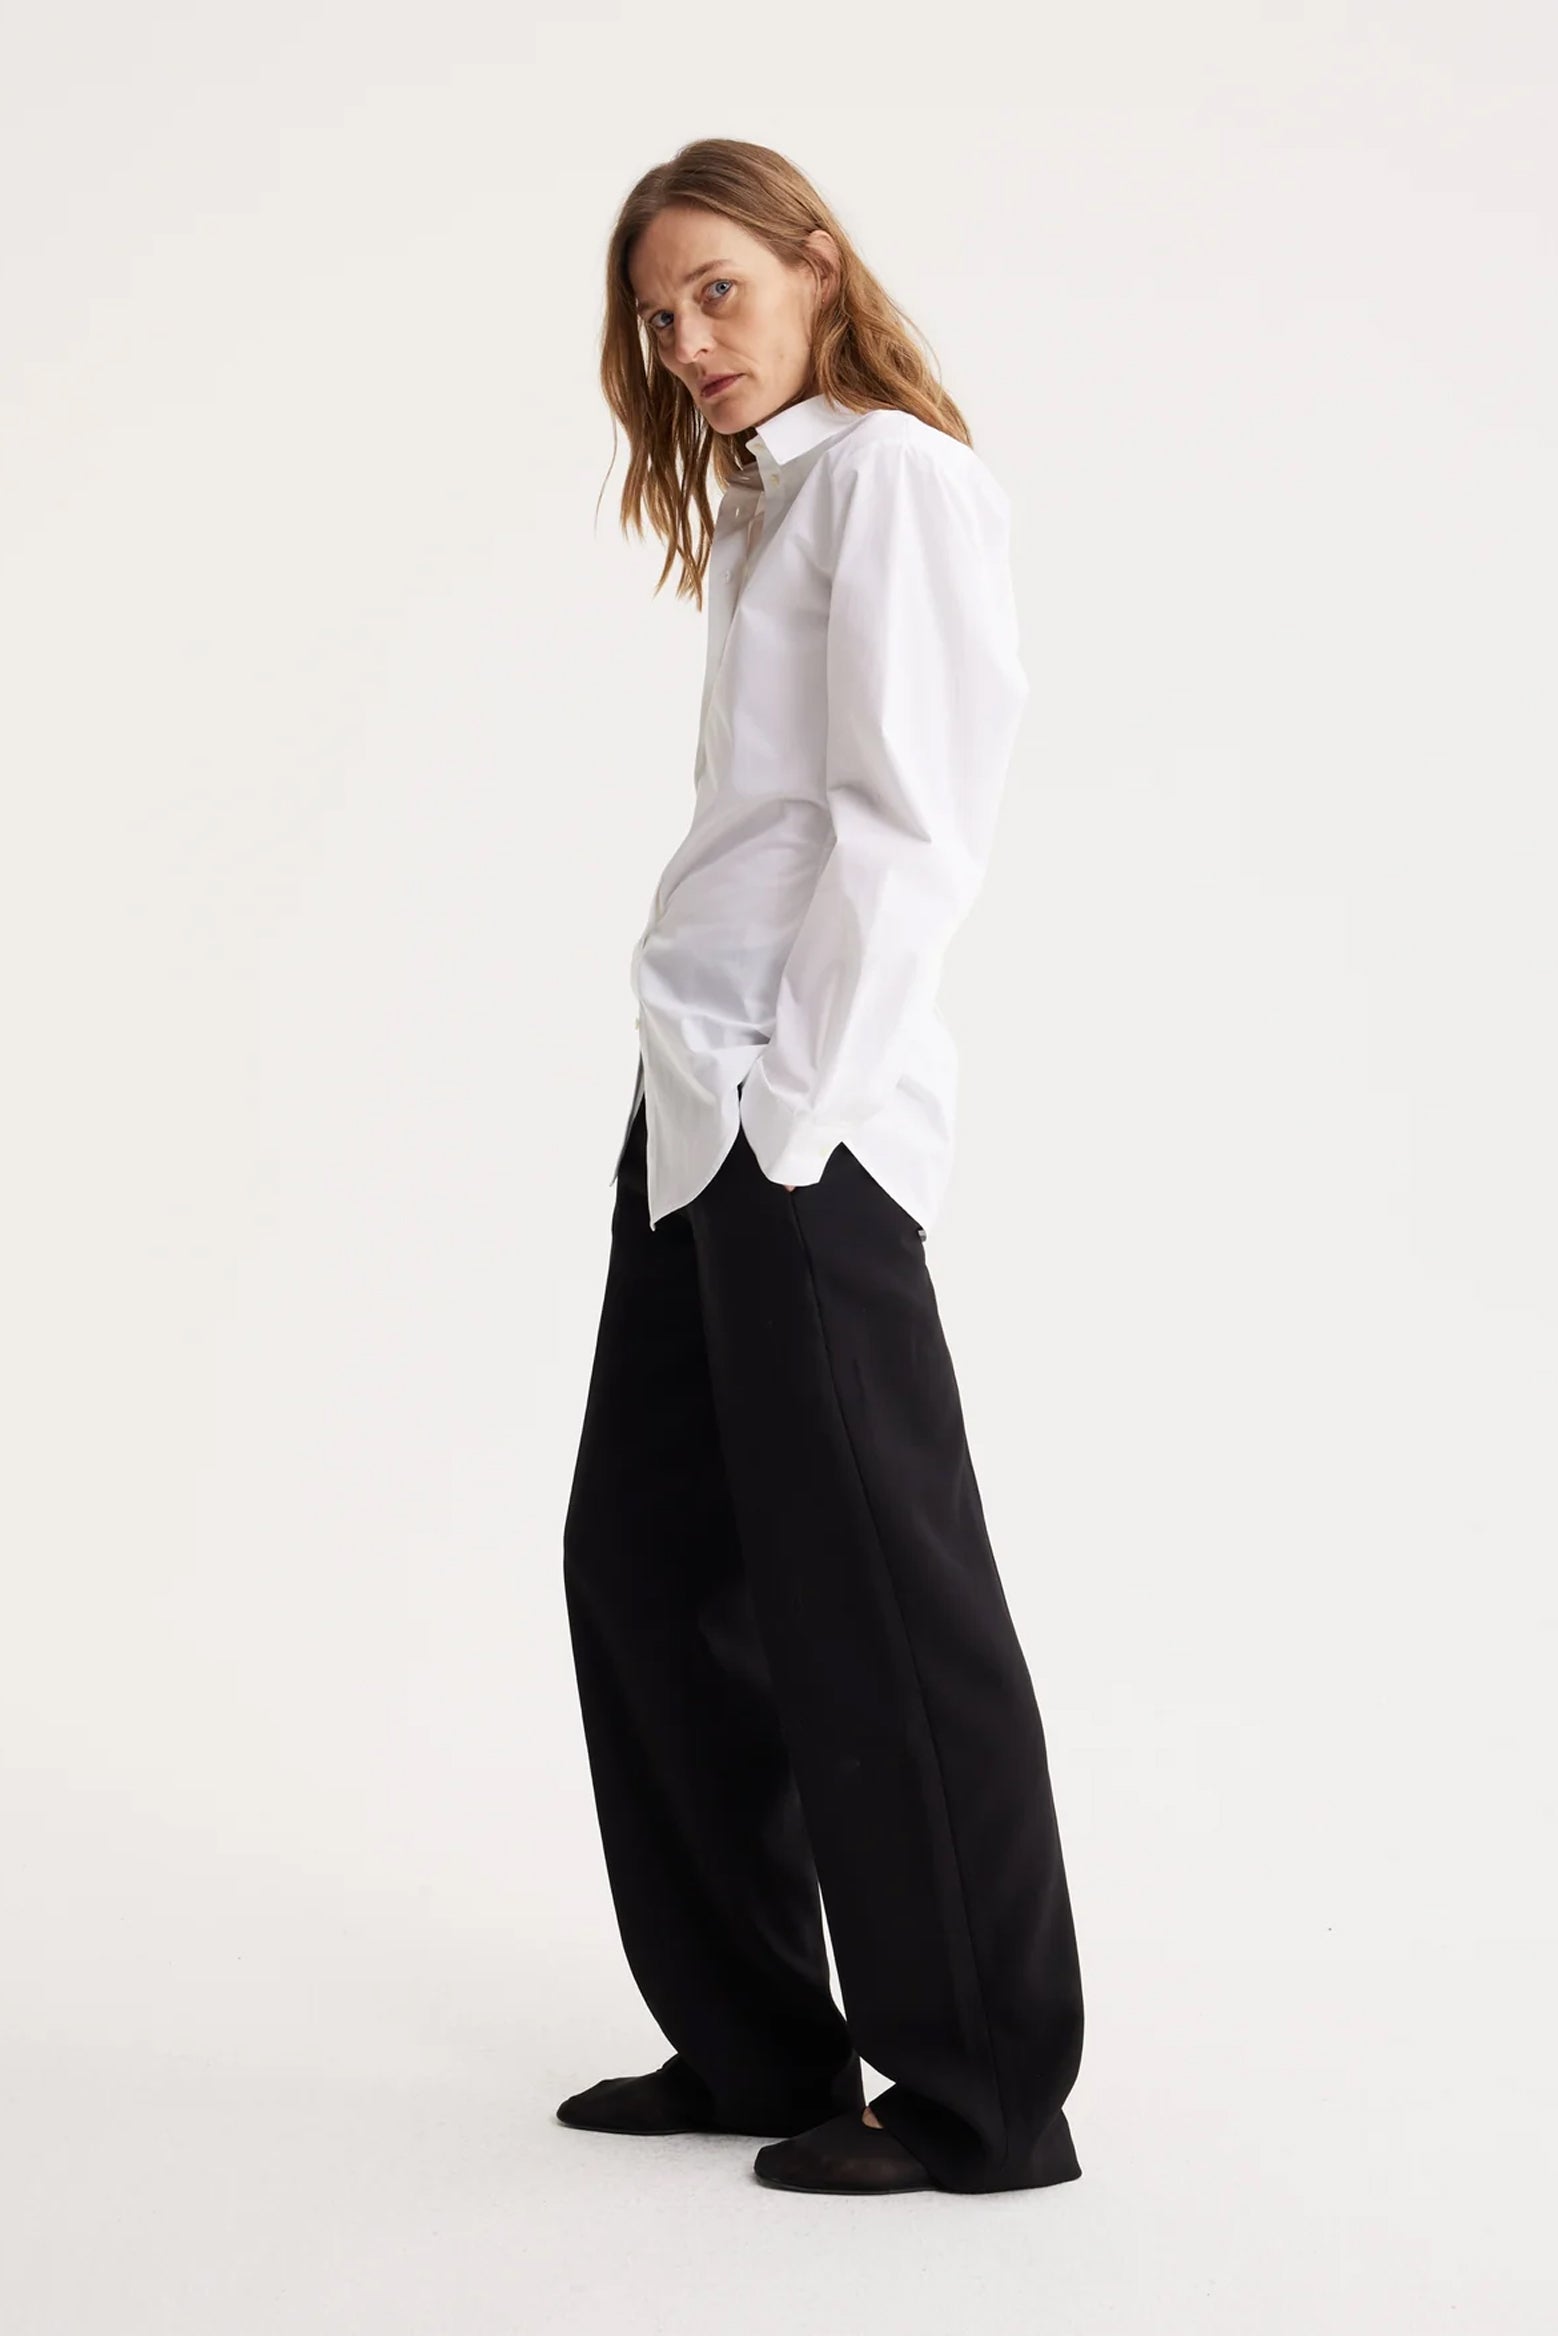 Rohe Shaped Poplin Shirt in White available at The New Trend Australia.